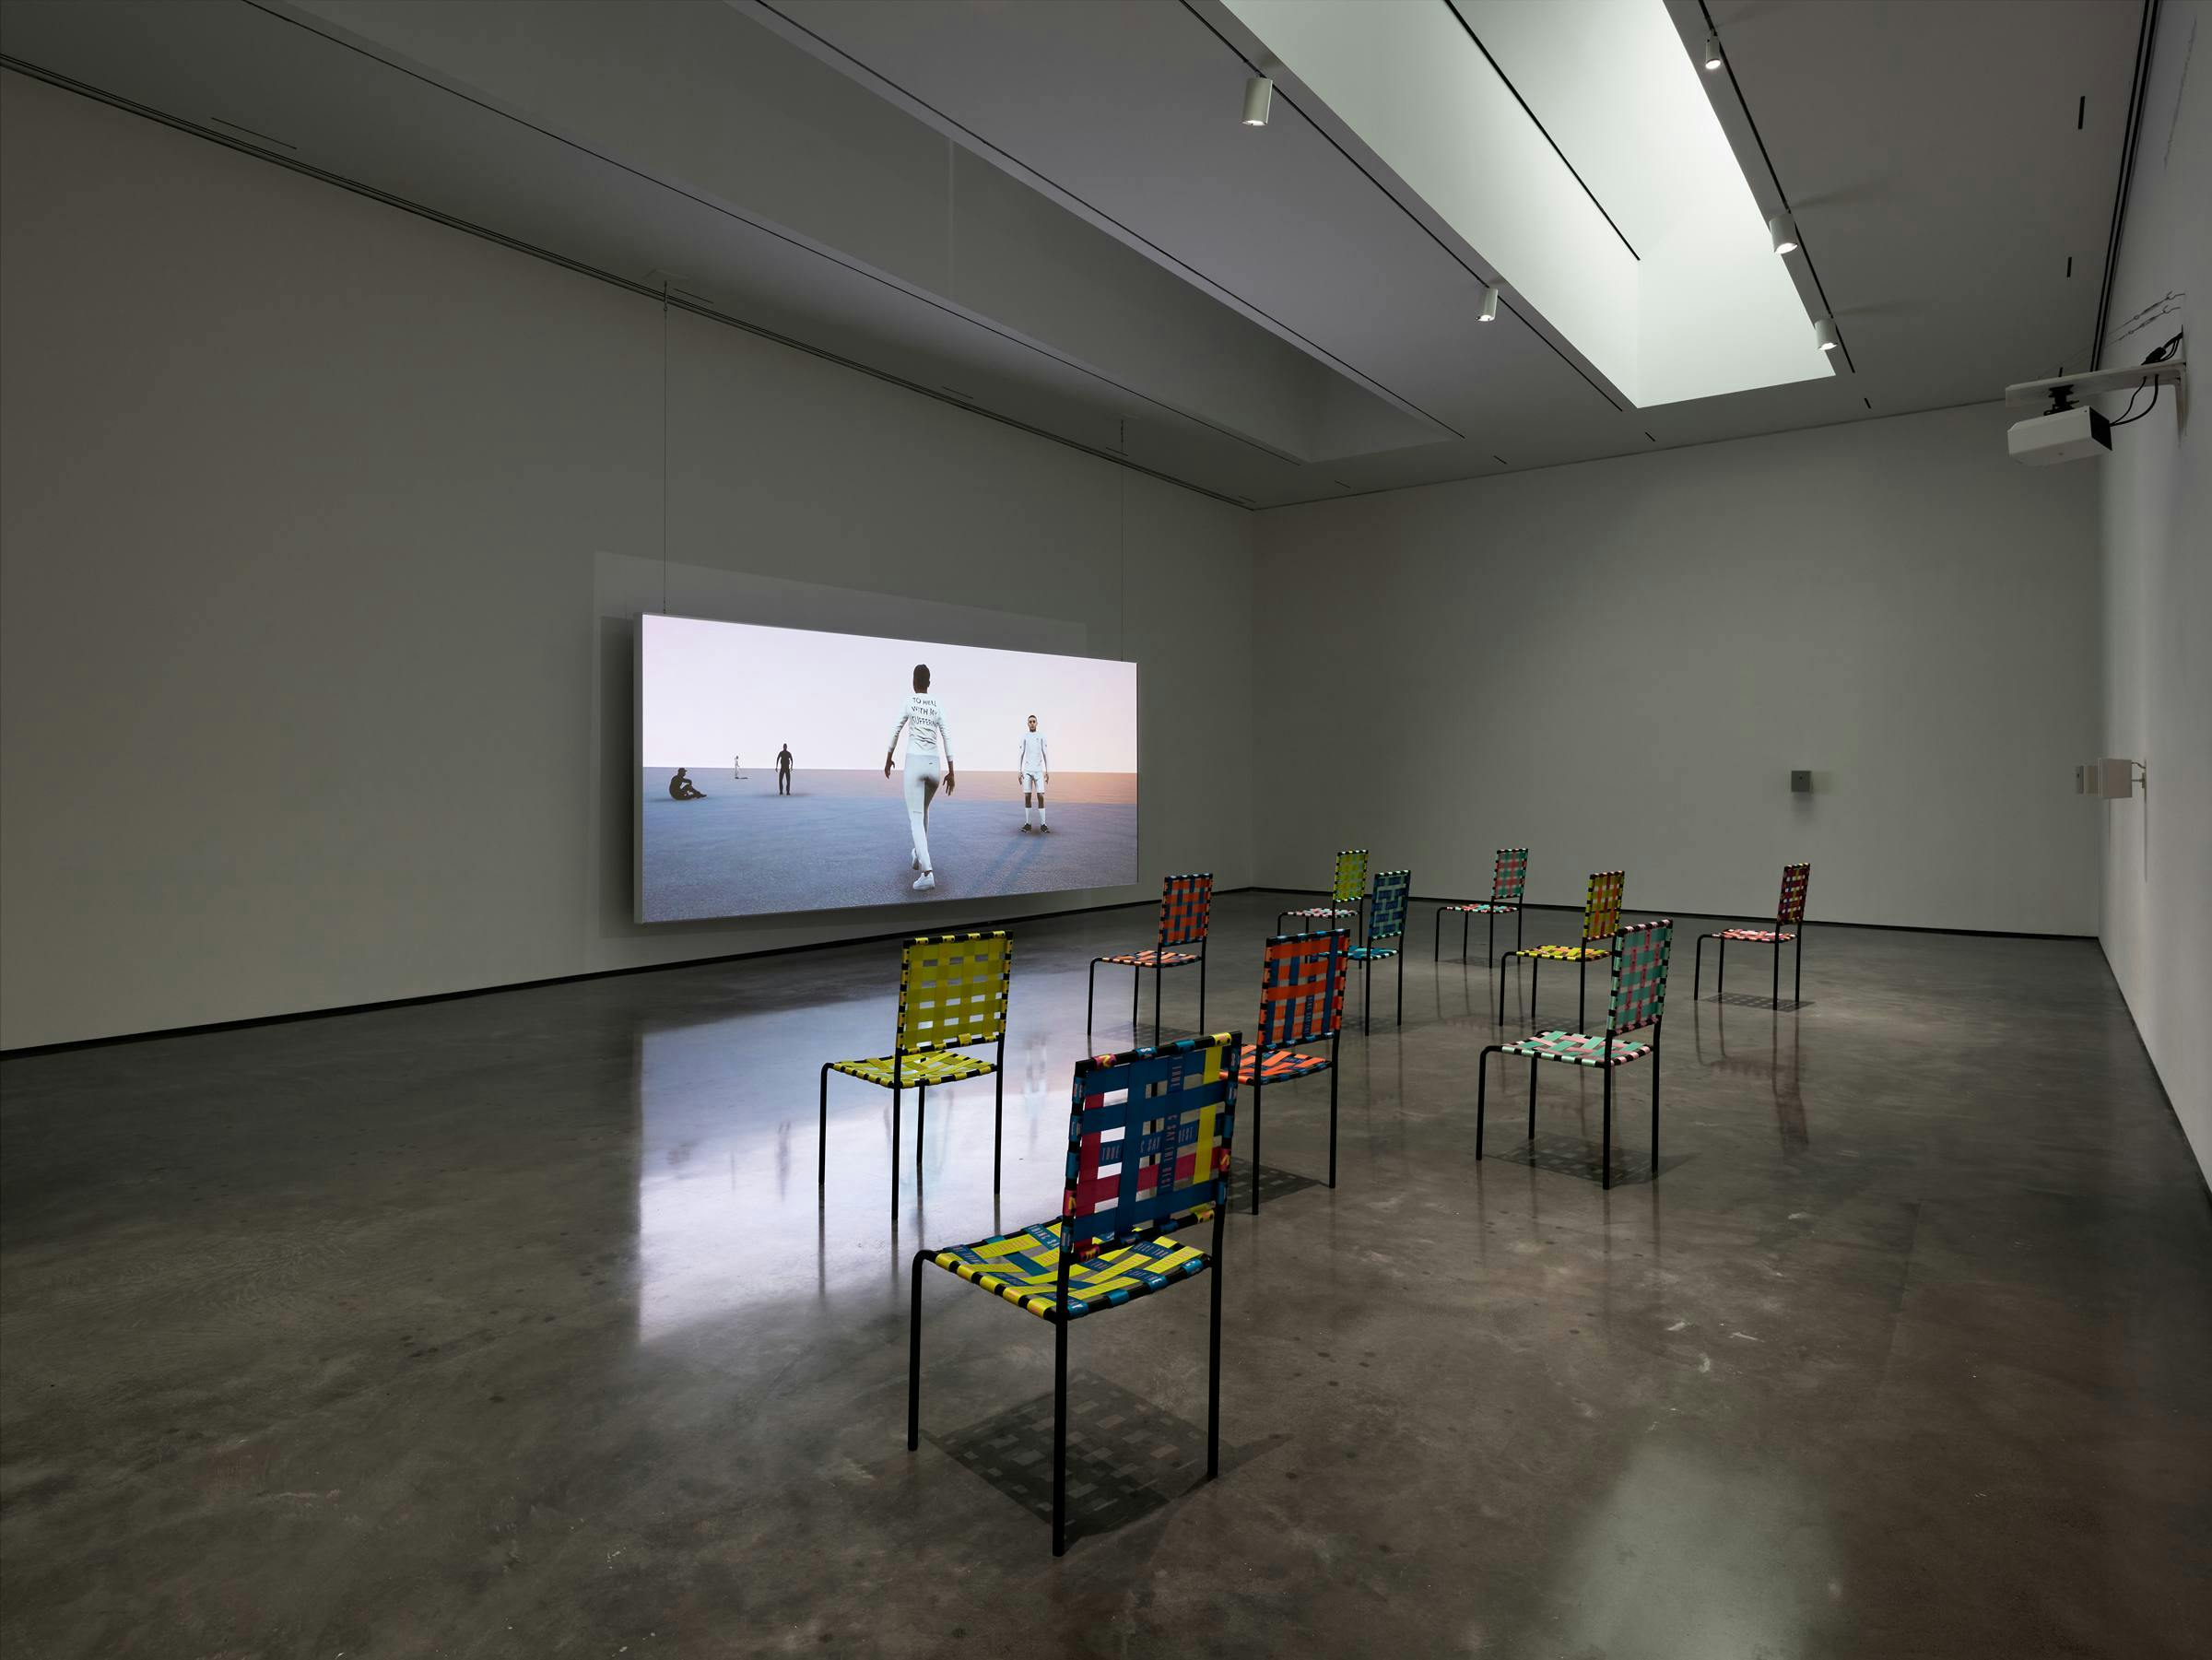 Image of a gallery space with a large projection on one wall with colorful chairs facing it.